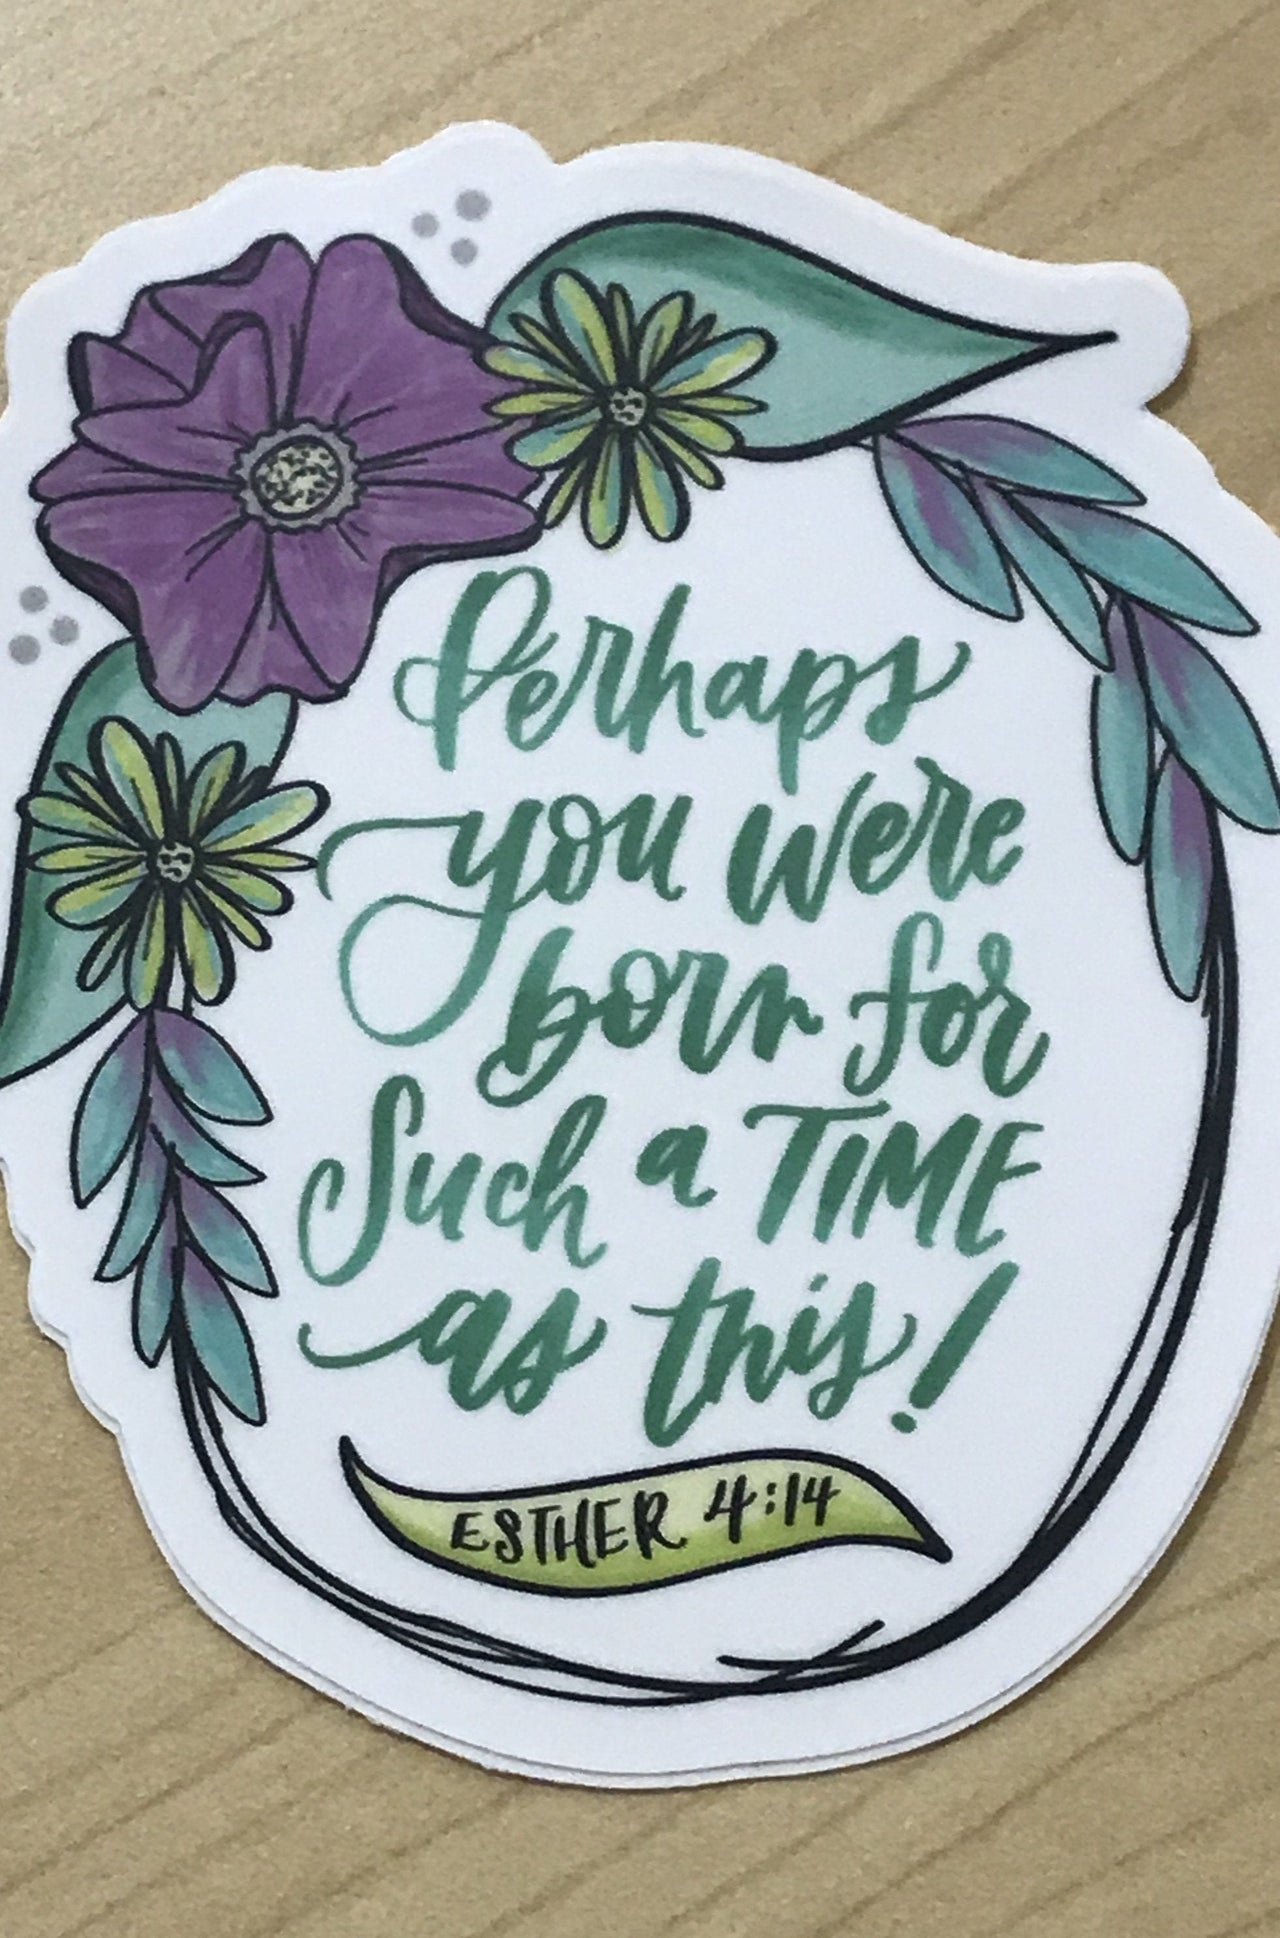 Decals | Krystal Whitten Krystal Whitten Decal For Such a time / Large